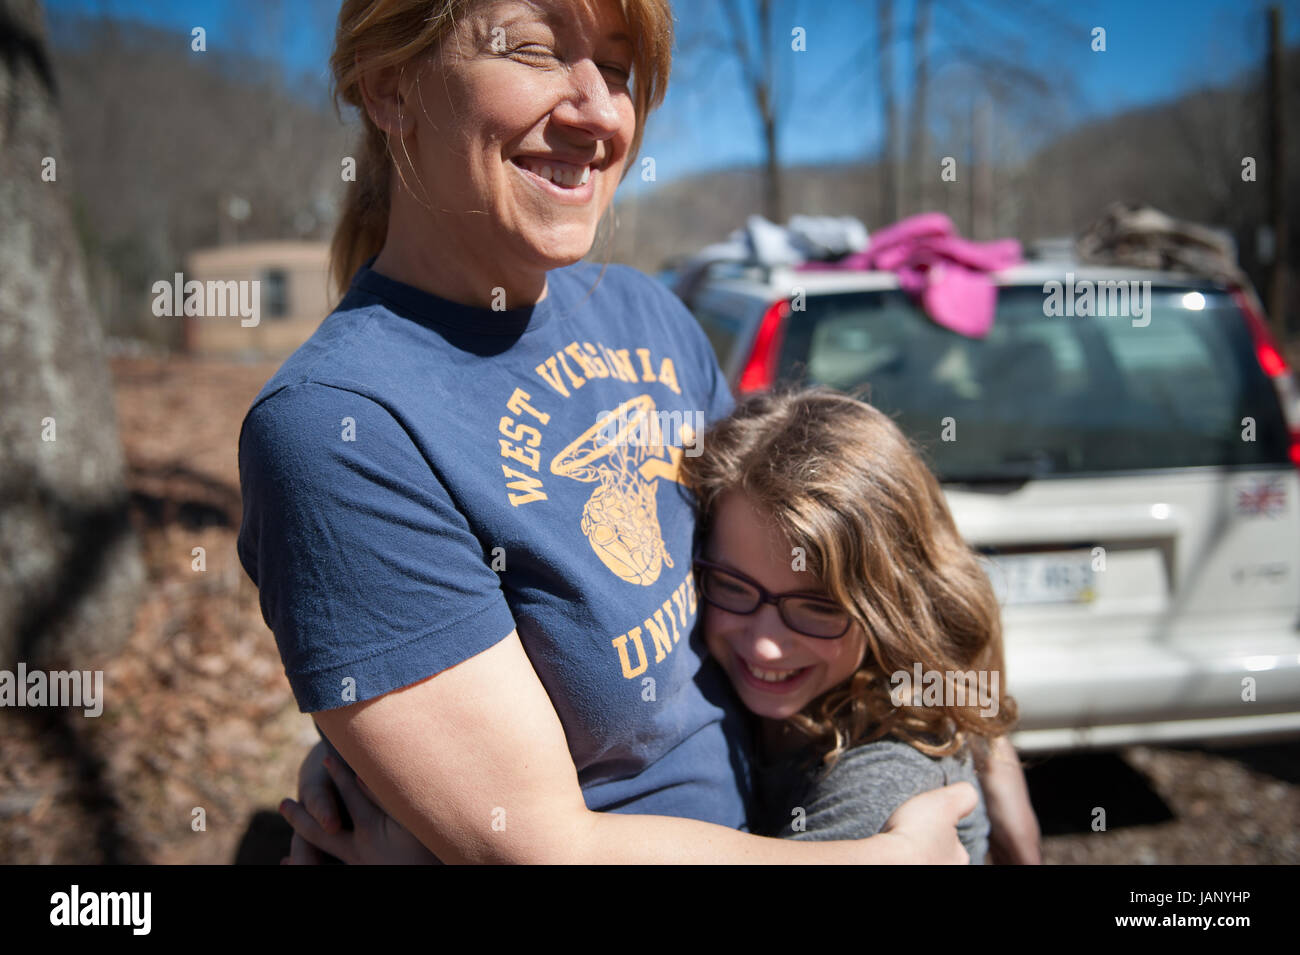 Volunteer Karan Ireland of Charleston, WV hugs her daughter Genevieve Ireland while helping with emergency water distribution at Three Fork hollow near Seth, WV.  Karen brought her children out because she believes strongly that it is very important for her children to lend a hand in the effort to help those who need water and to realize the scope of the crisis.   She is also one of the organizers of a new group in Charleston called Citizens Actively Protecting the Environment (CAPE) which sprung up as a result of the Elk River chemical spill.   CAPE is a loosely knit group of local environmen Stock Photo